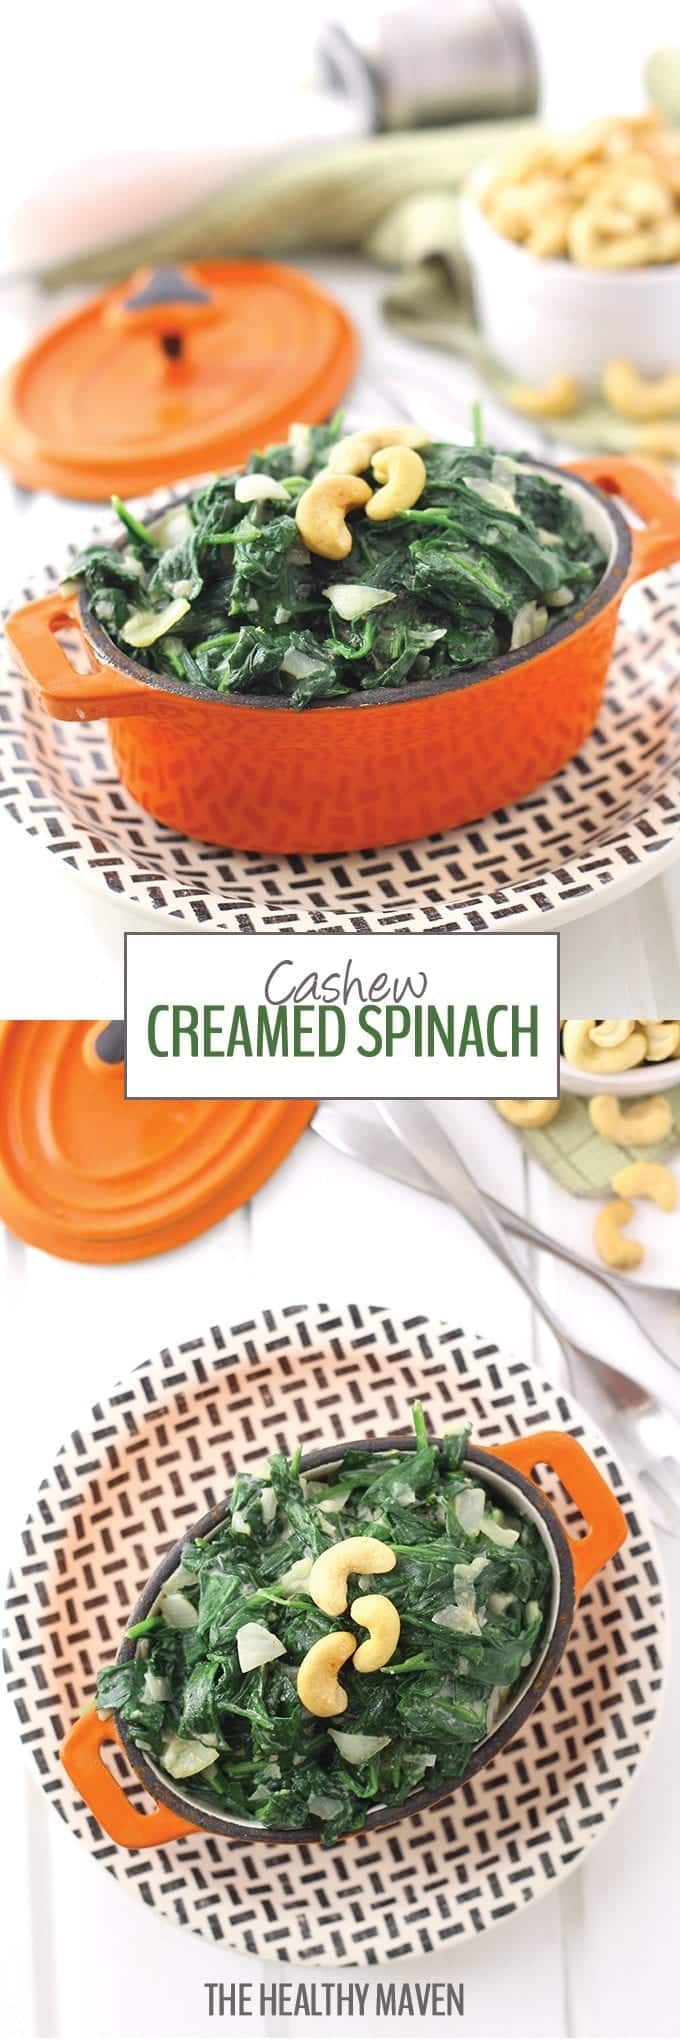 Ditch the cream and replace it with cashews! This cashew creamed spinach, made from blended cashews makes a delicious and nutritious dinner side and is ready in under 5 minutes!